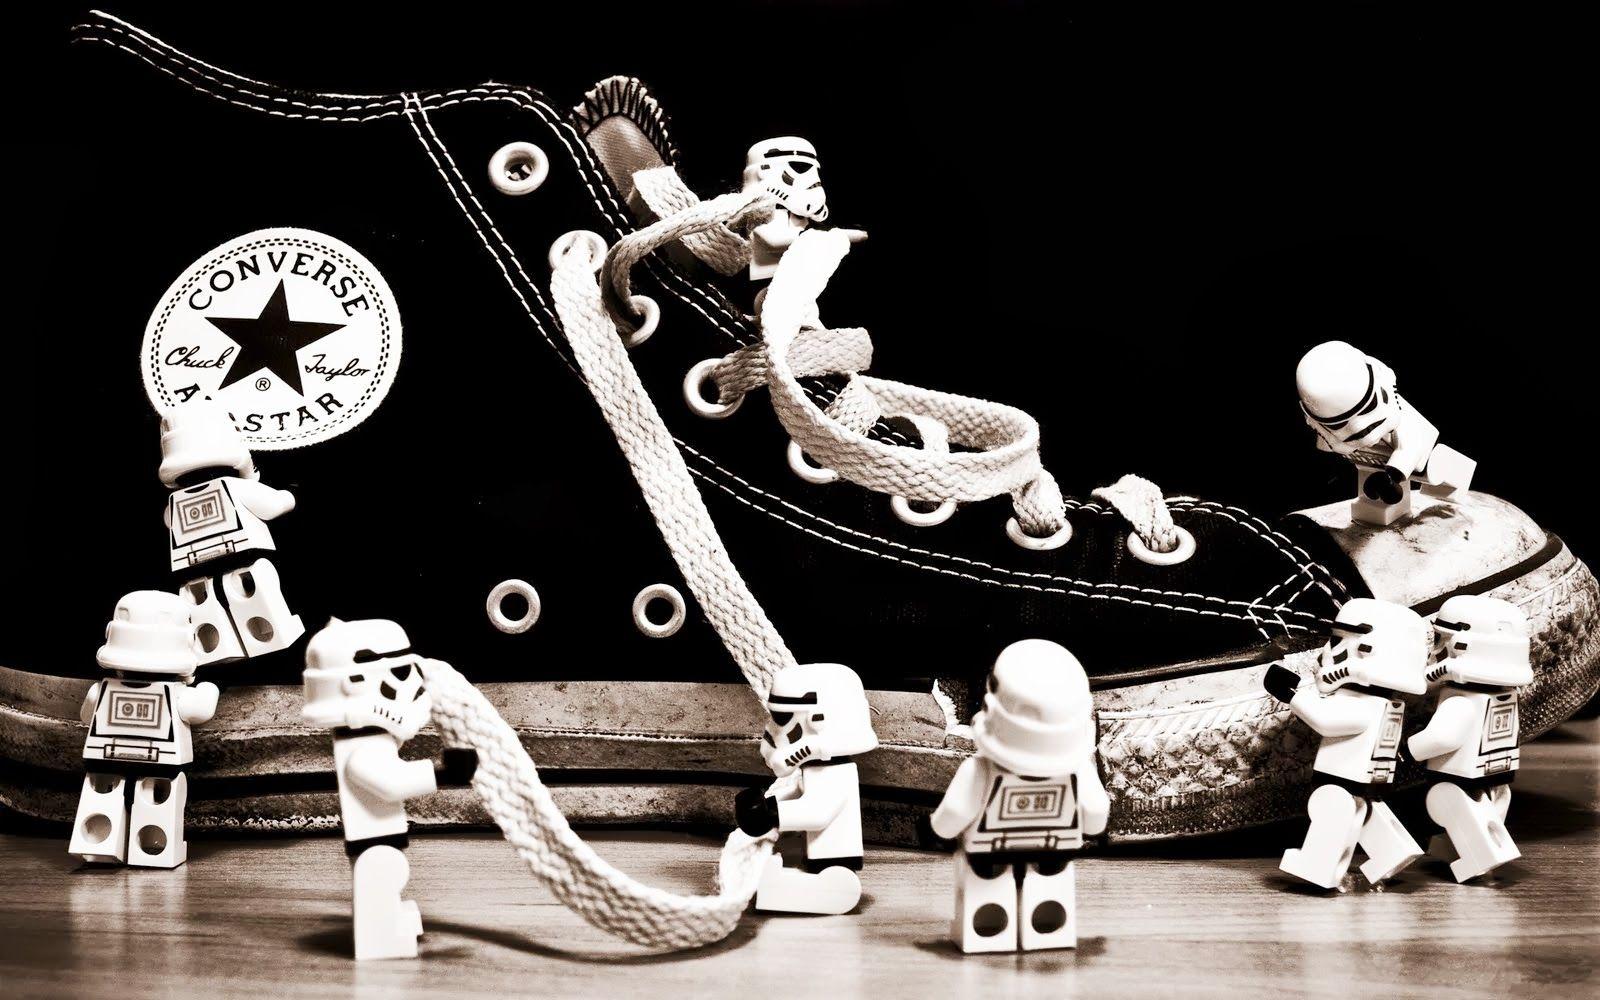 basketball stars picture: Converse Star Lego Wars Stormtroopers